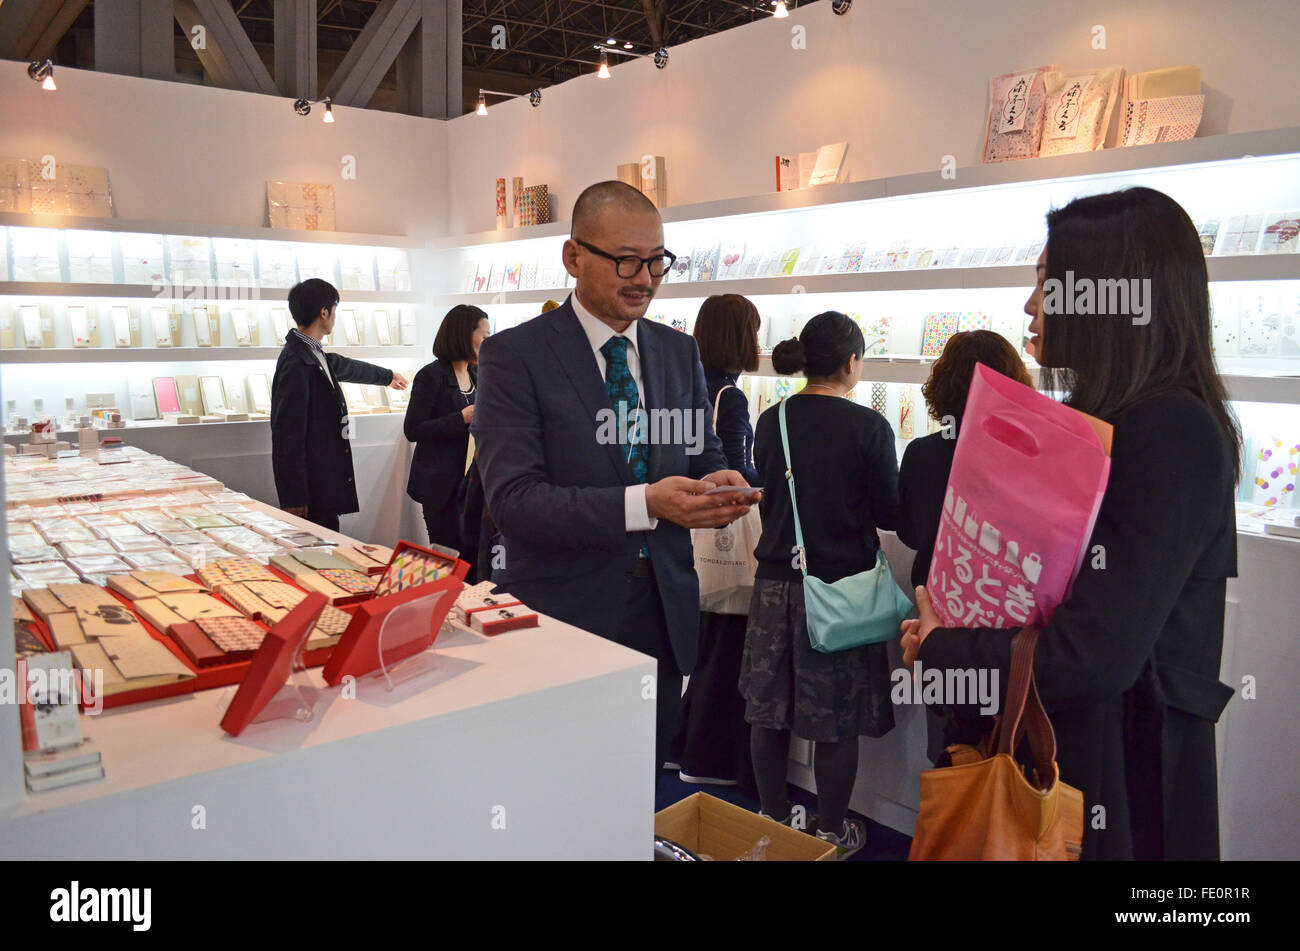 Tokyo, Japan. 3rd Feb, 2016. Hidenori Tanaka of Washiclub Co. Japan talks to an atendee during the 81st Tokyo International Gift Show Spring 2016. The show offers a collection of the latest smart phone goods, stationary, hobby material goods, exhibits of personal gifts, consumer goods and decorative accessories. The show also includes a new product contest in which more than 400 new products enter to compite. Also a collection of unique products from all over the world to compete in the most popular imported product contest. Kitchen and dining room goods contest. Established in 1976, TIGS is Stock Photo